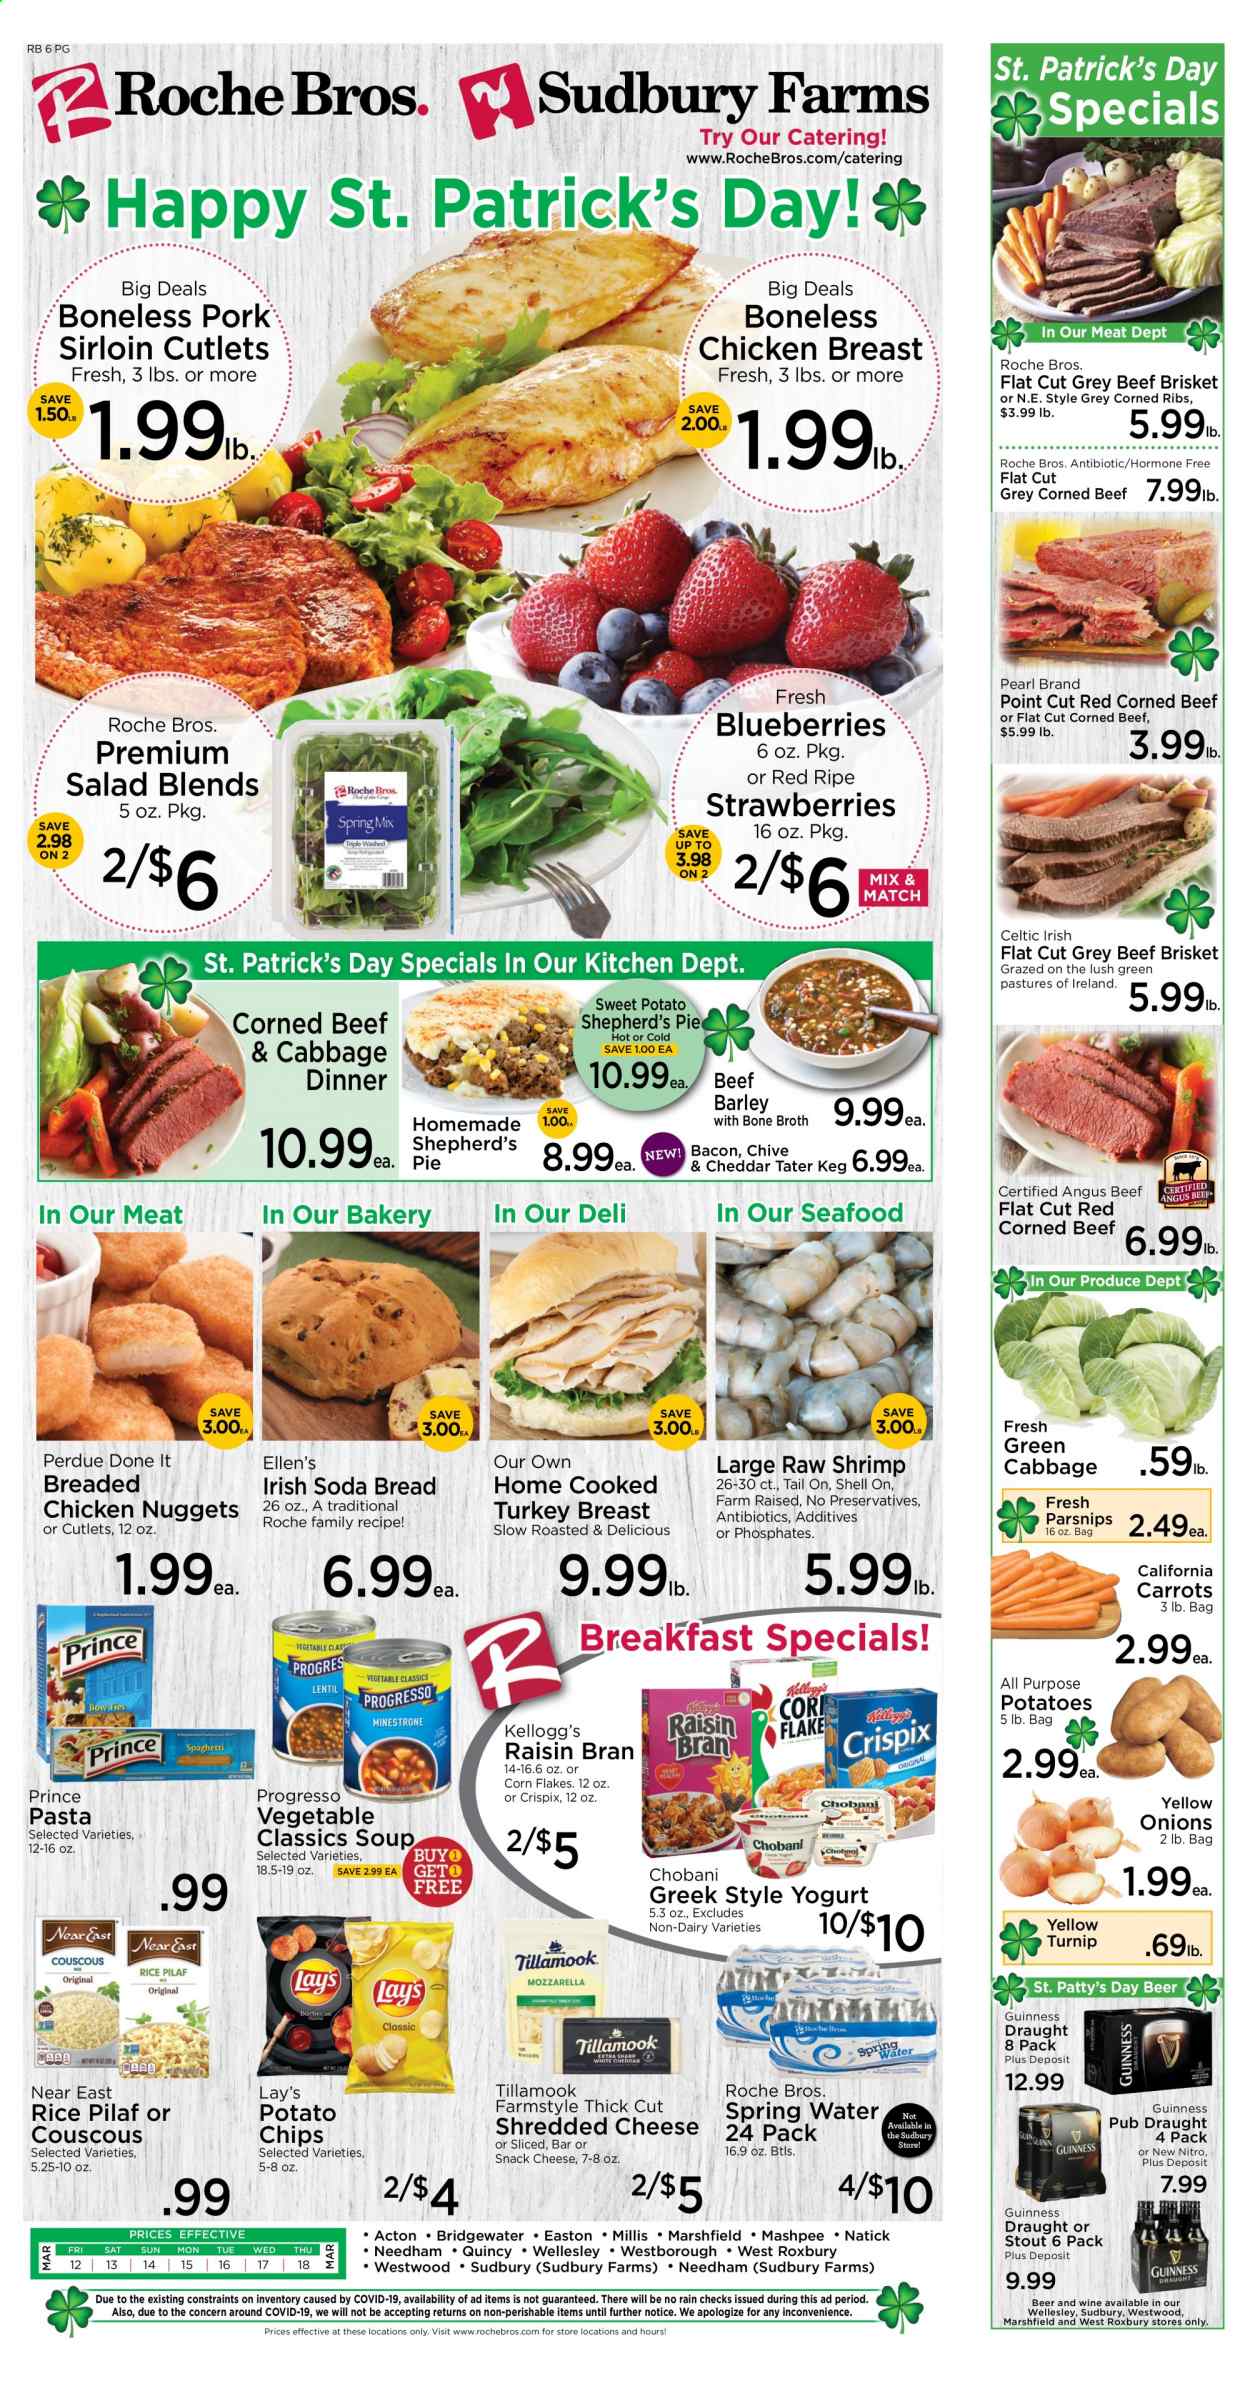 thumbnail - Roche Bros. Flyer - 03/12/2021 - 03/18/2021 - Sales products - sweet potato, parsnips, blueberries, bread, soda bread, pie, seafood, shrimps, soup, nuggets, salad, chicken nuggets, Progresso, Perdue®, bacon, shredded cheese, yoghurt, Chobani, carrots, strawberries, Kellogg's, potato chips, chips, snack, Lay’s, broth, corn flakes, Raisin Bran, couscous, rice, pasta, spring water, wine, beer, Guinness, turkey breast, chicken breasts, beef meat, corned beef, beef brisket, pork loin. Page 1.